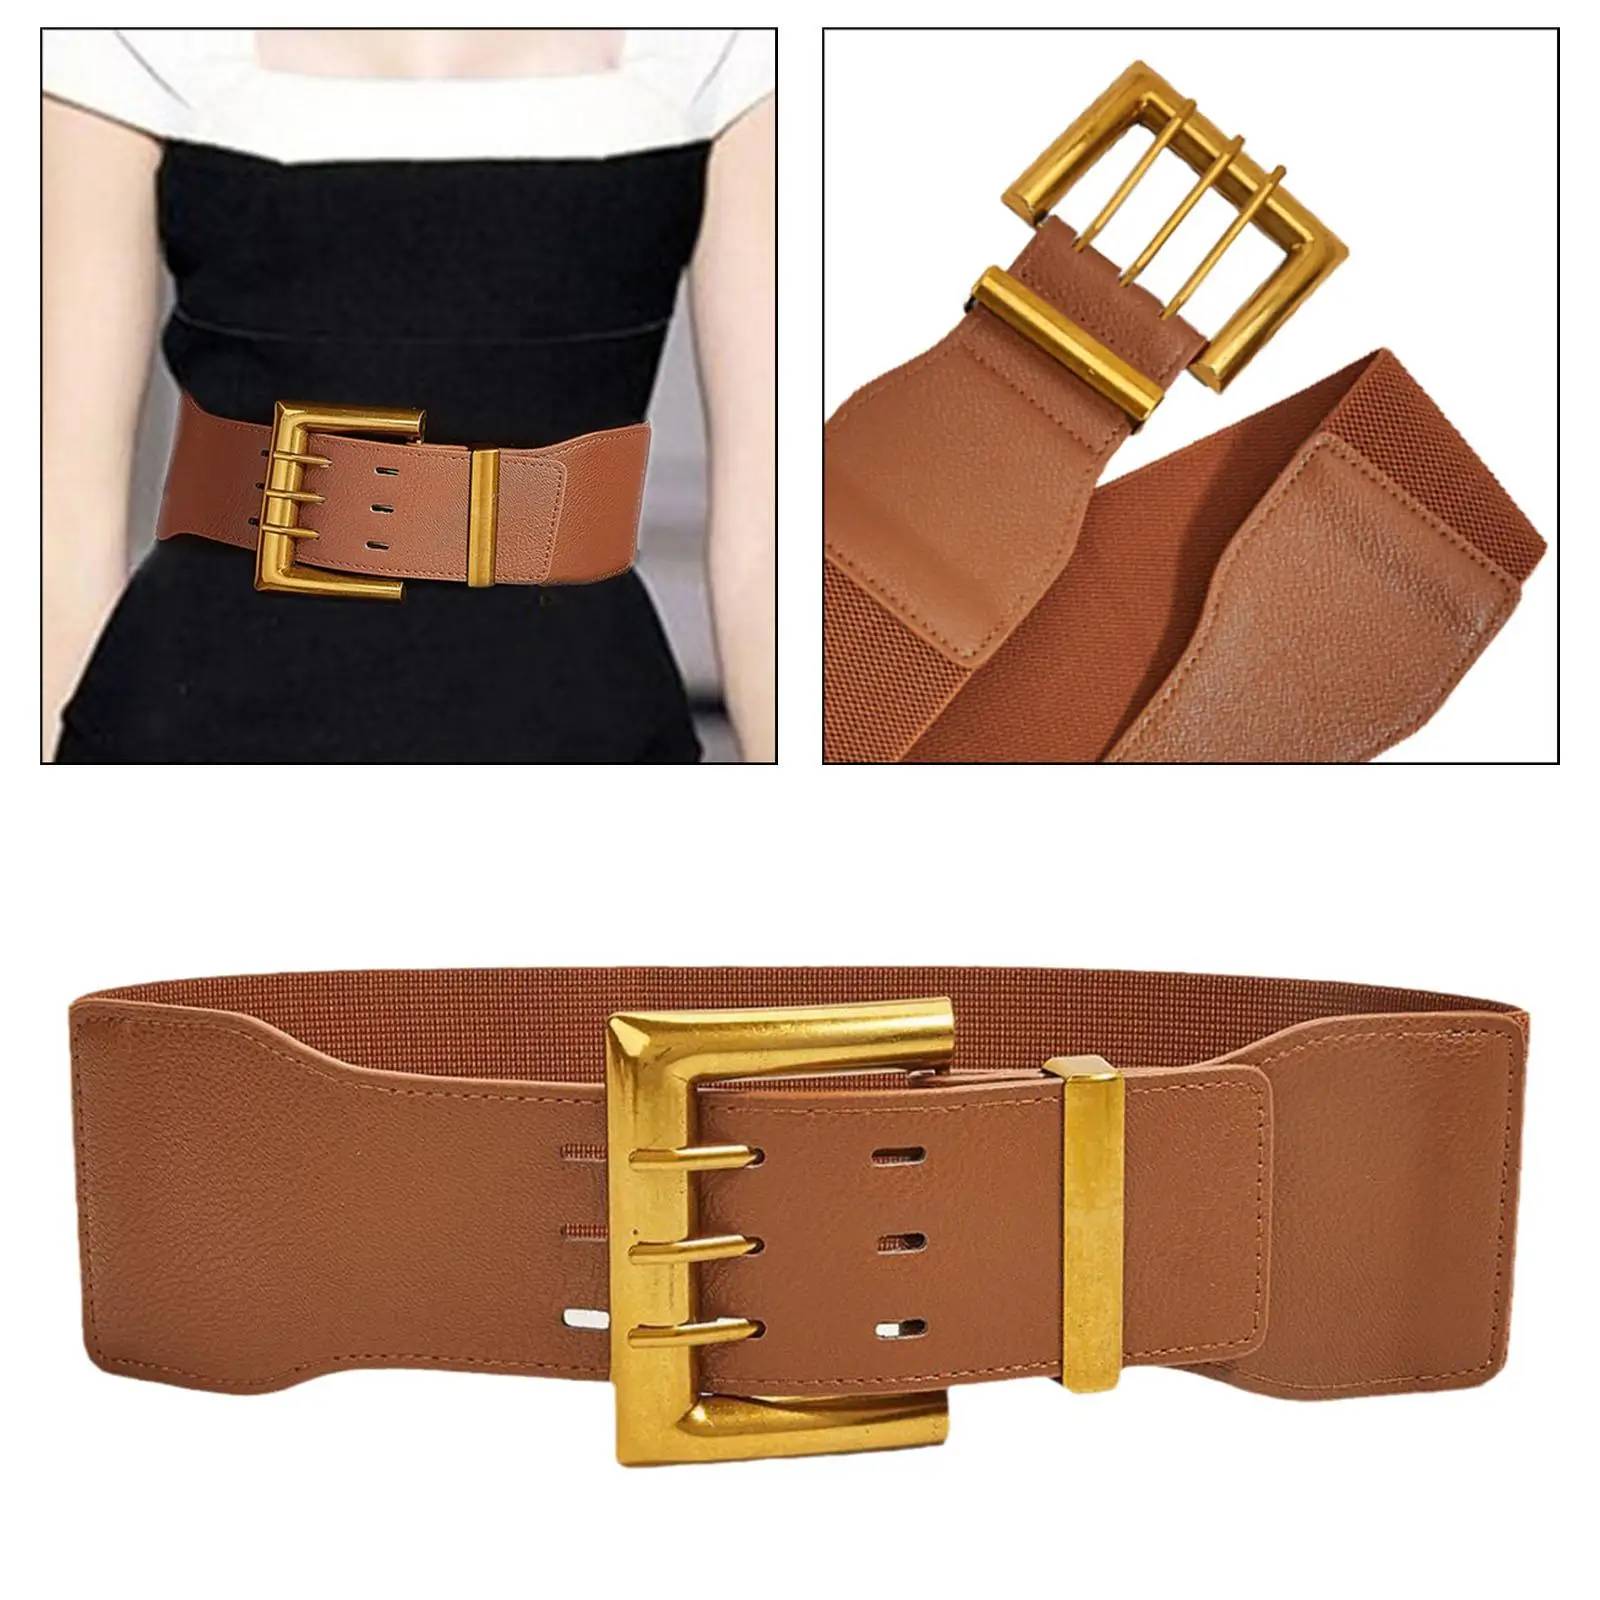 Women`s Wide Elastic Belt Decor Cinch Belt Decorative Belt Girdle Solid Color PU Leather Waistband for Lady Clothing Accessories